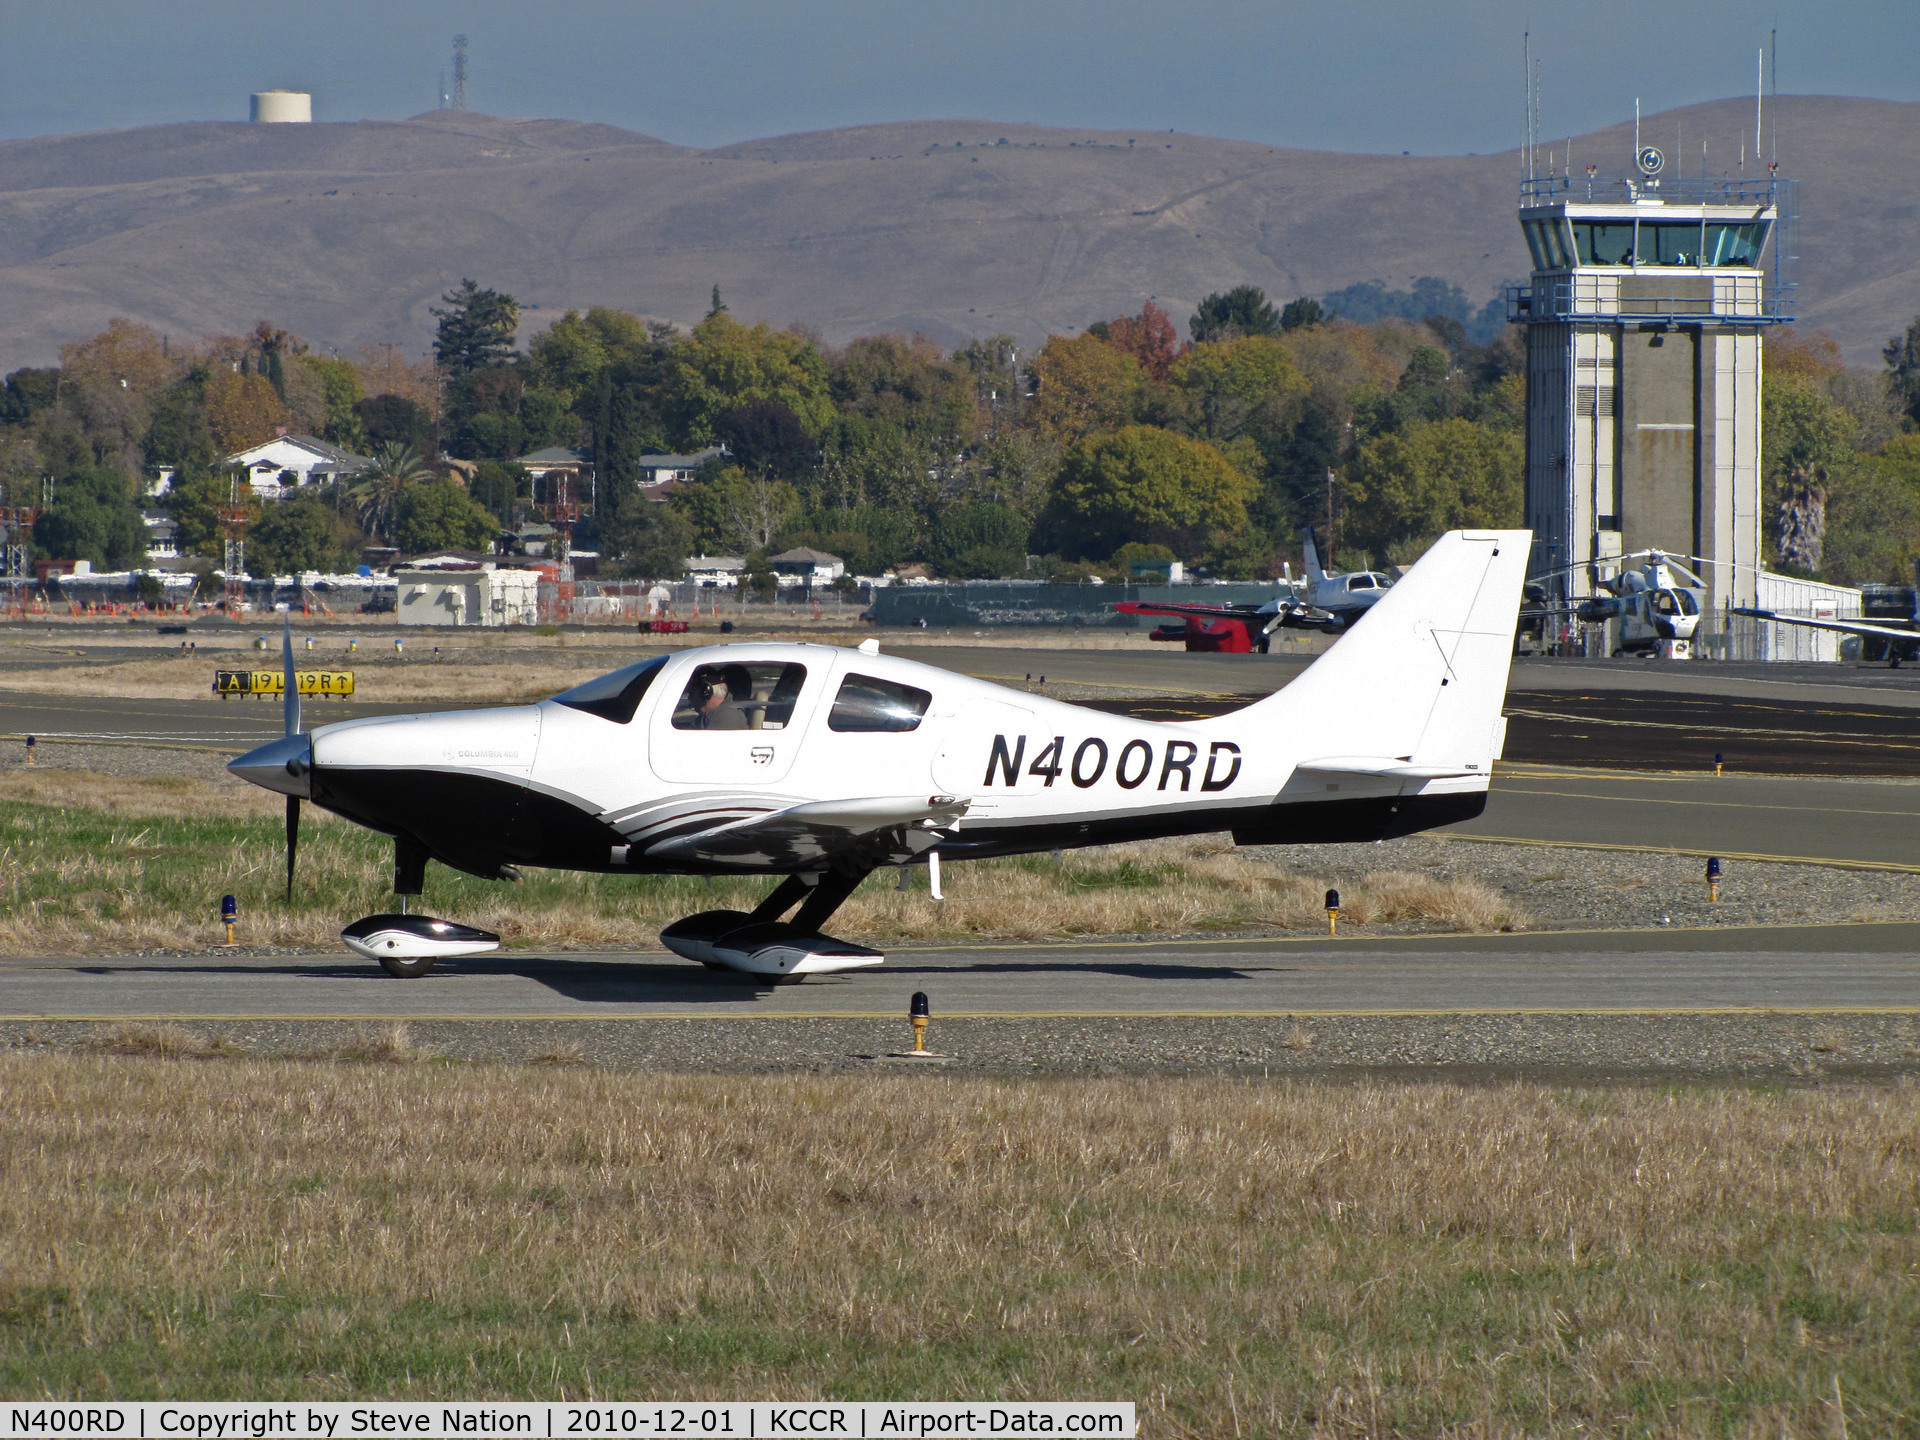 N400RD, 2005 Lancair LC41-550FG C/N 41519, Locally-based 2005 Lancair LC41-550FG Columbia 400 taxiing to RWY 1L with tower in background @ Buchanan Field, Concord, CA